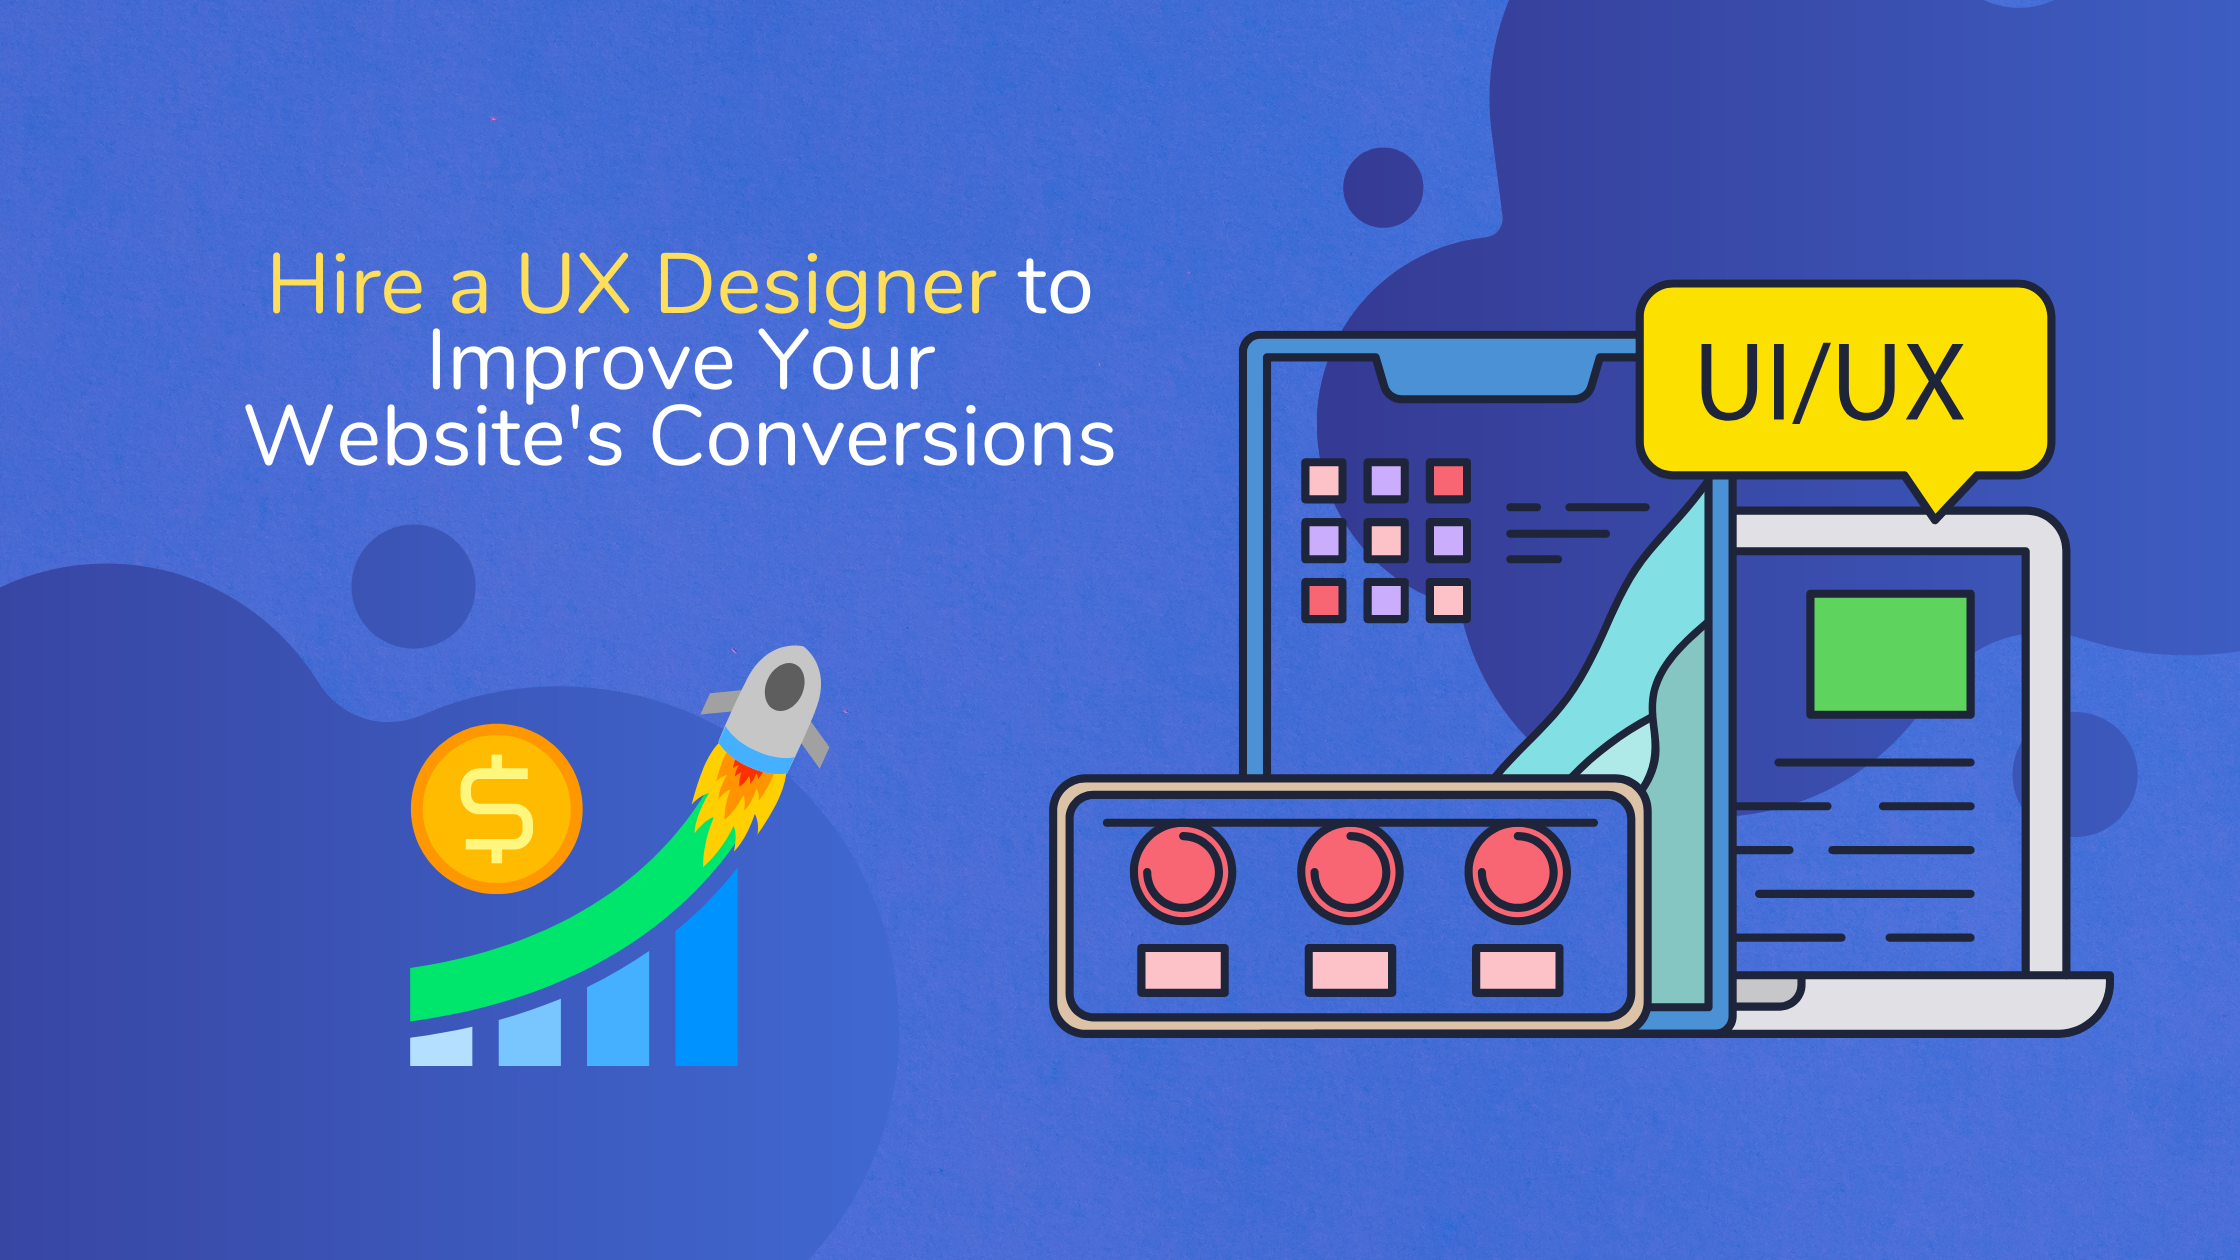 Hire a UX Designer to Improve Your Website's Conversions